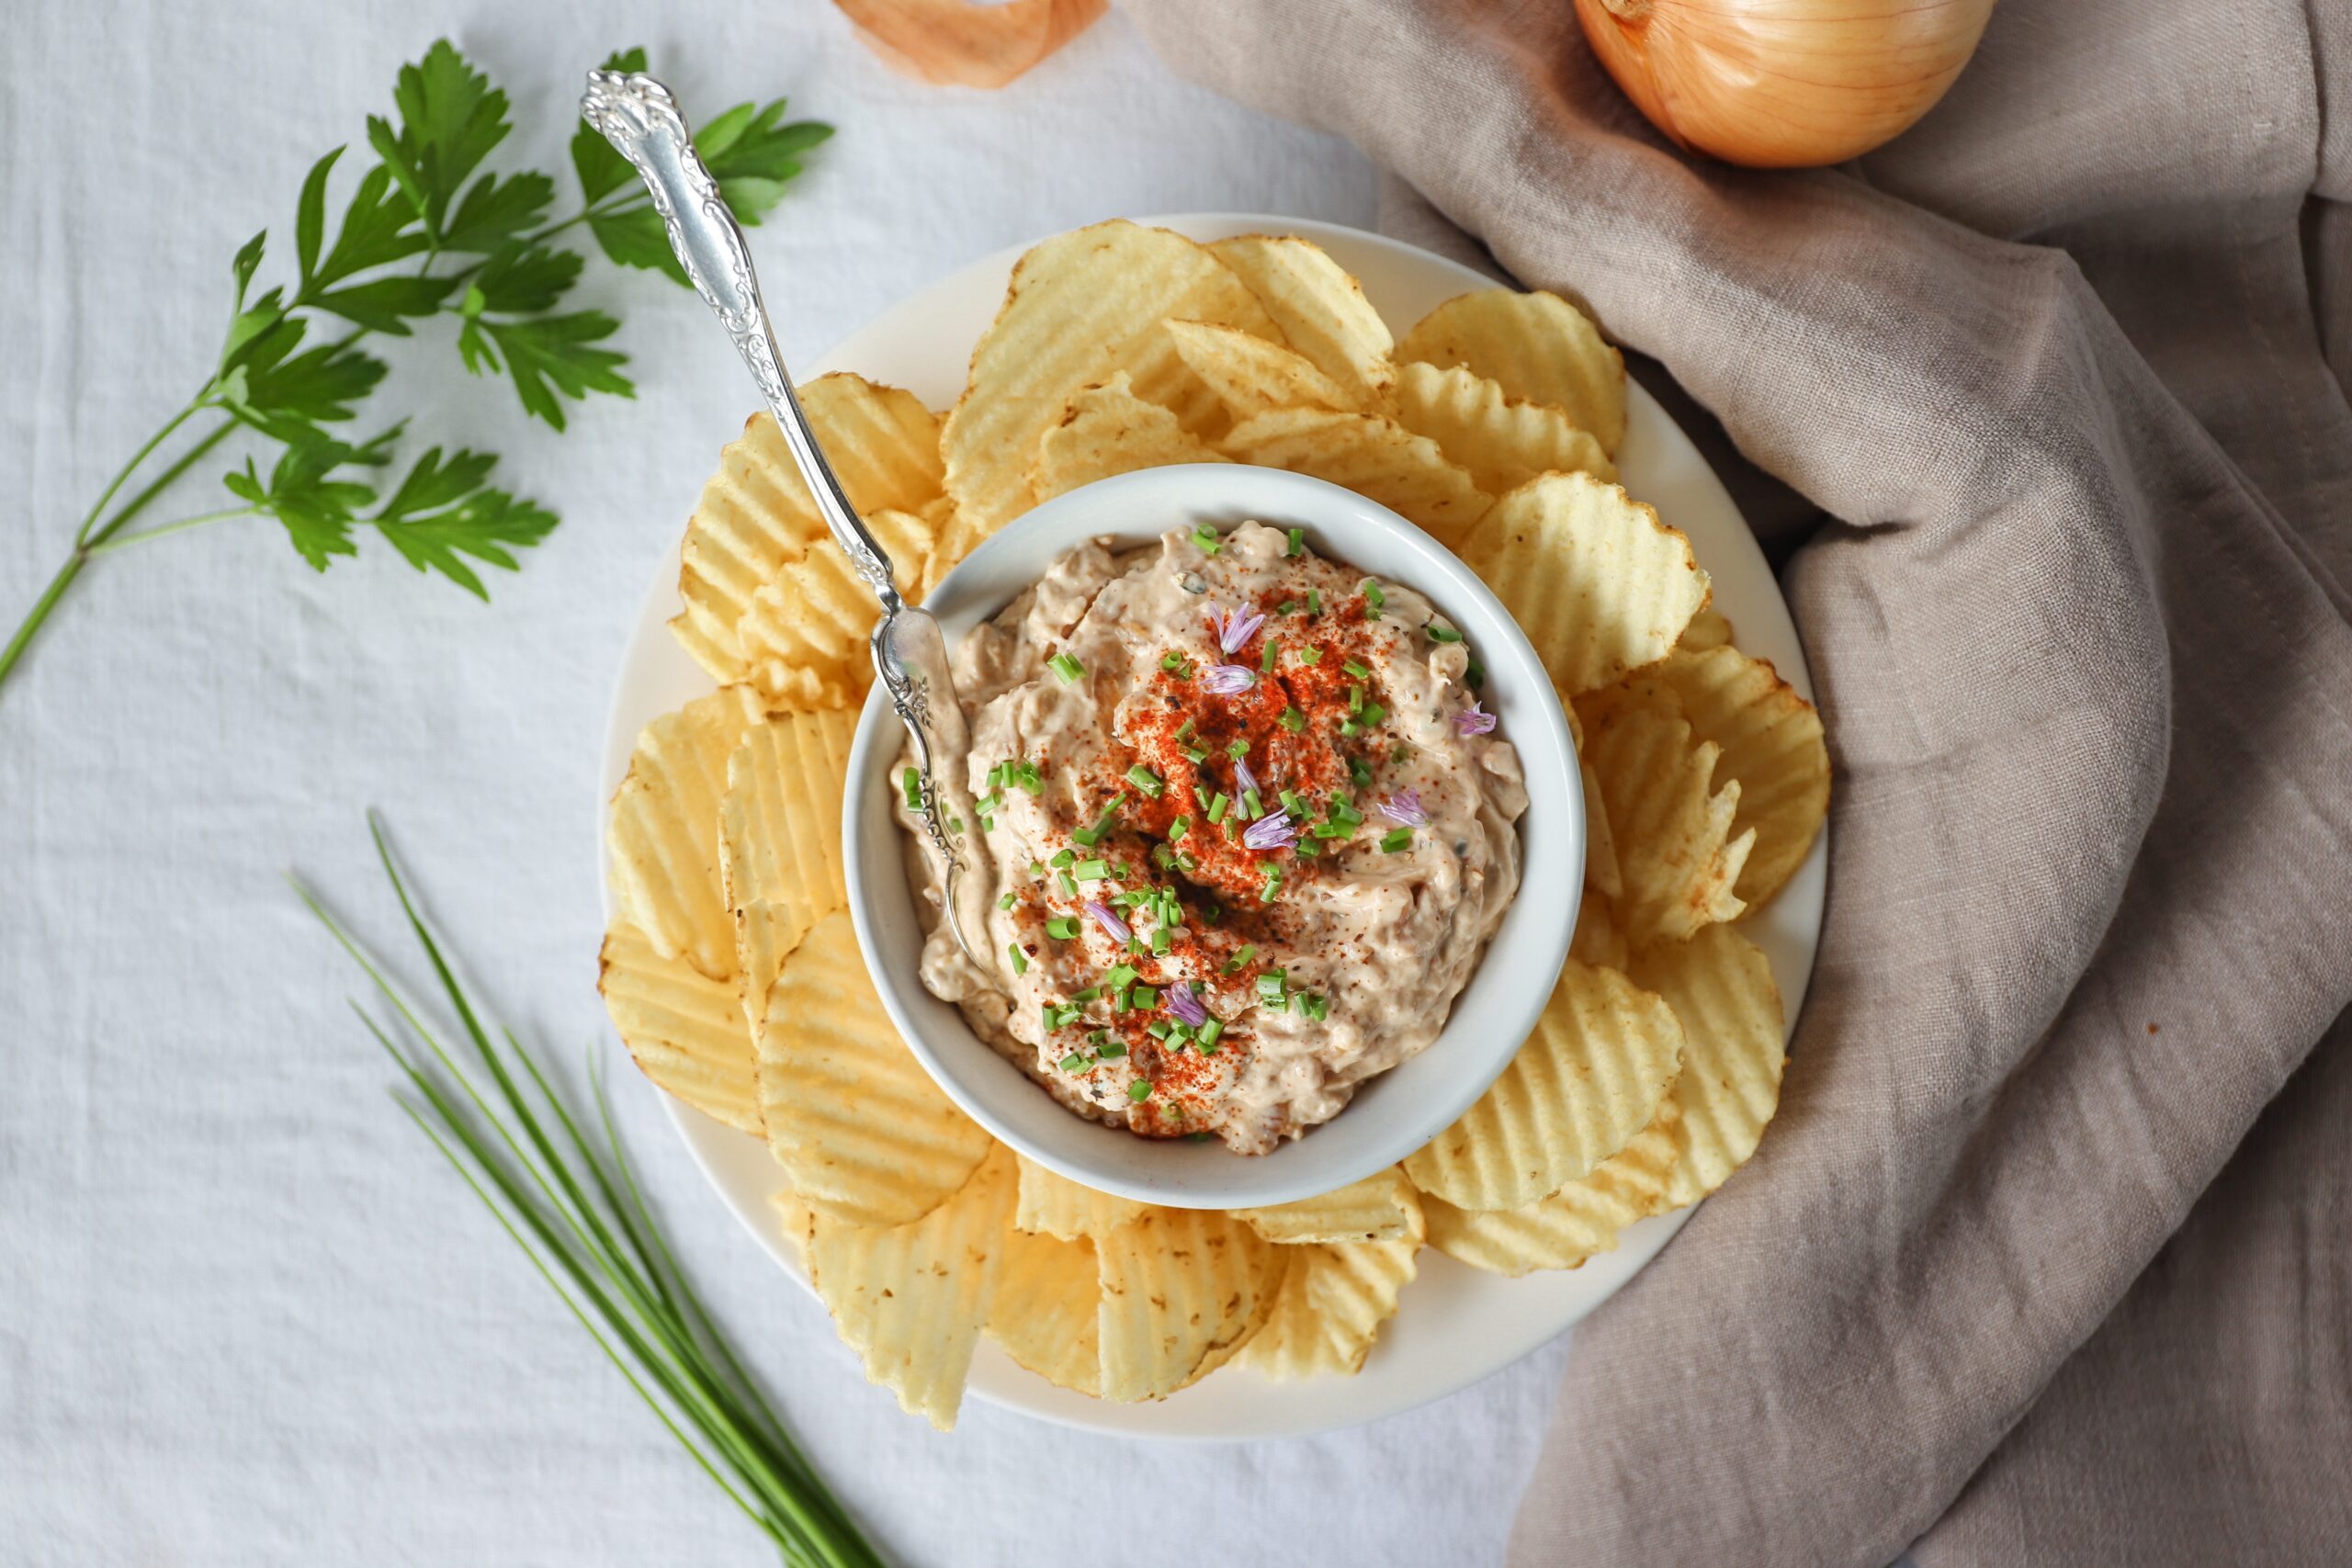 The Best Caramelized Onion And Blue Cheese Dip Ever!